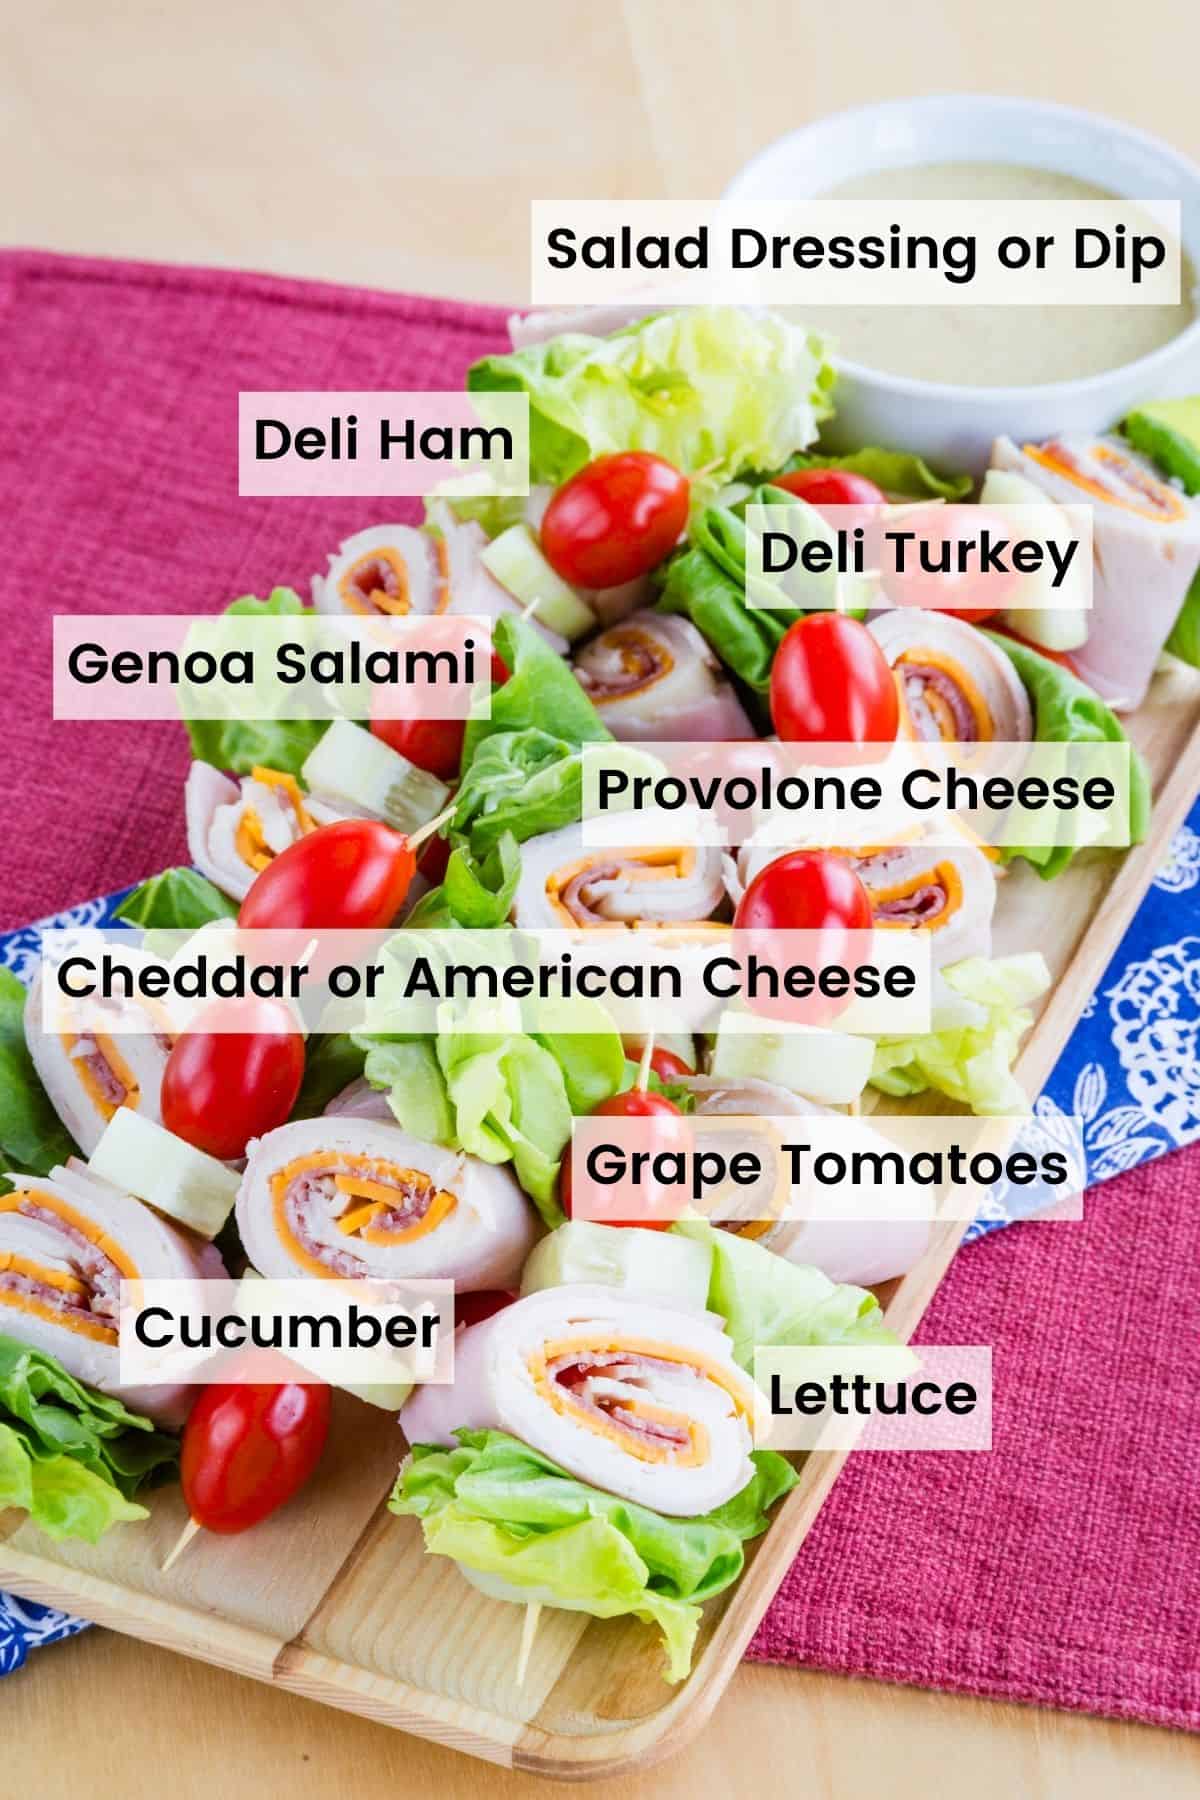 A platter of chef salad on a stick skewers with text labels of the ingredients including: Salad dressing or dip, Deli Ham, Deli Turkey, Genoa Salami, Provolone Cheese, Cheddar or American Cheese, Grape Tomatoes, Cucumber, and Lettuce.